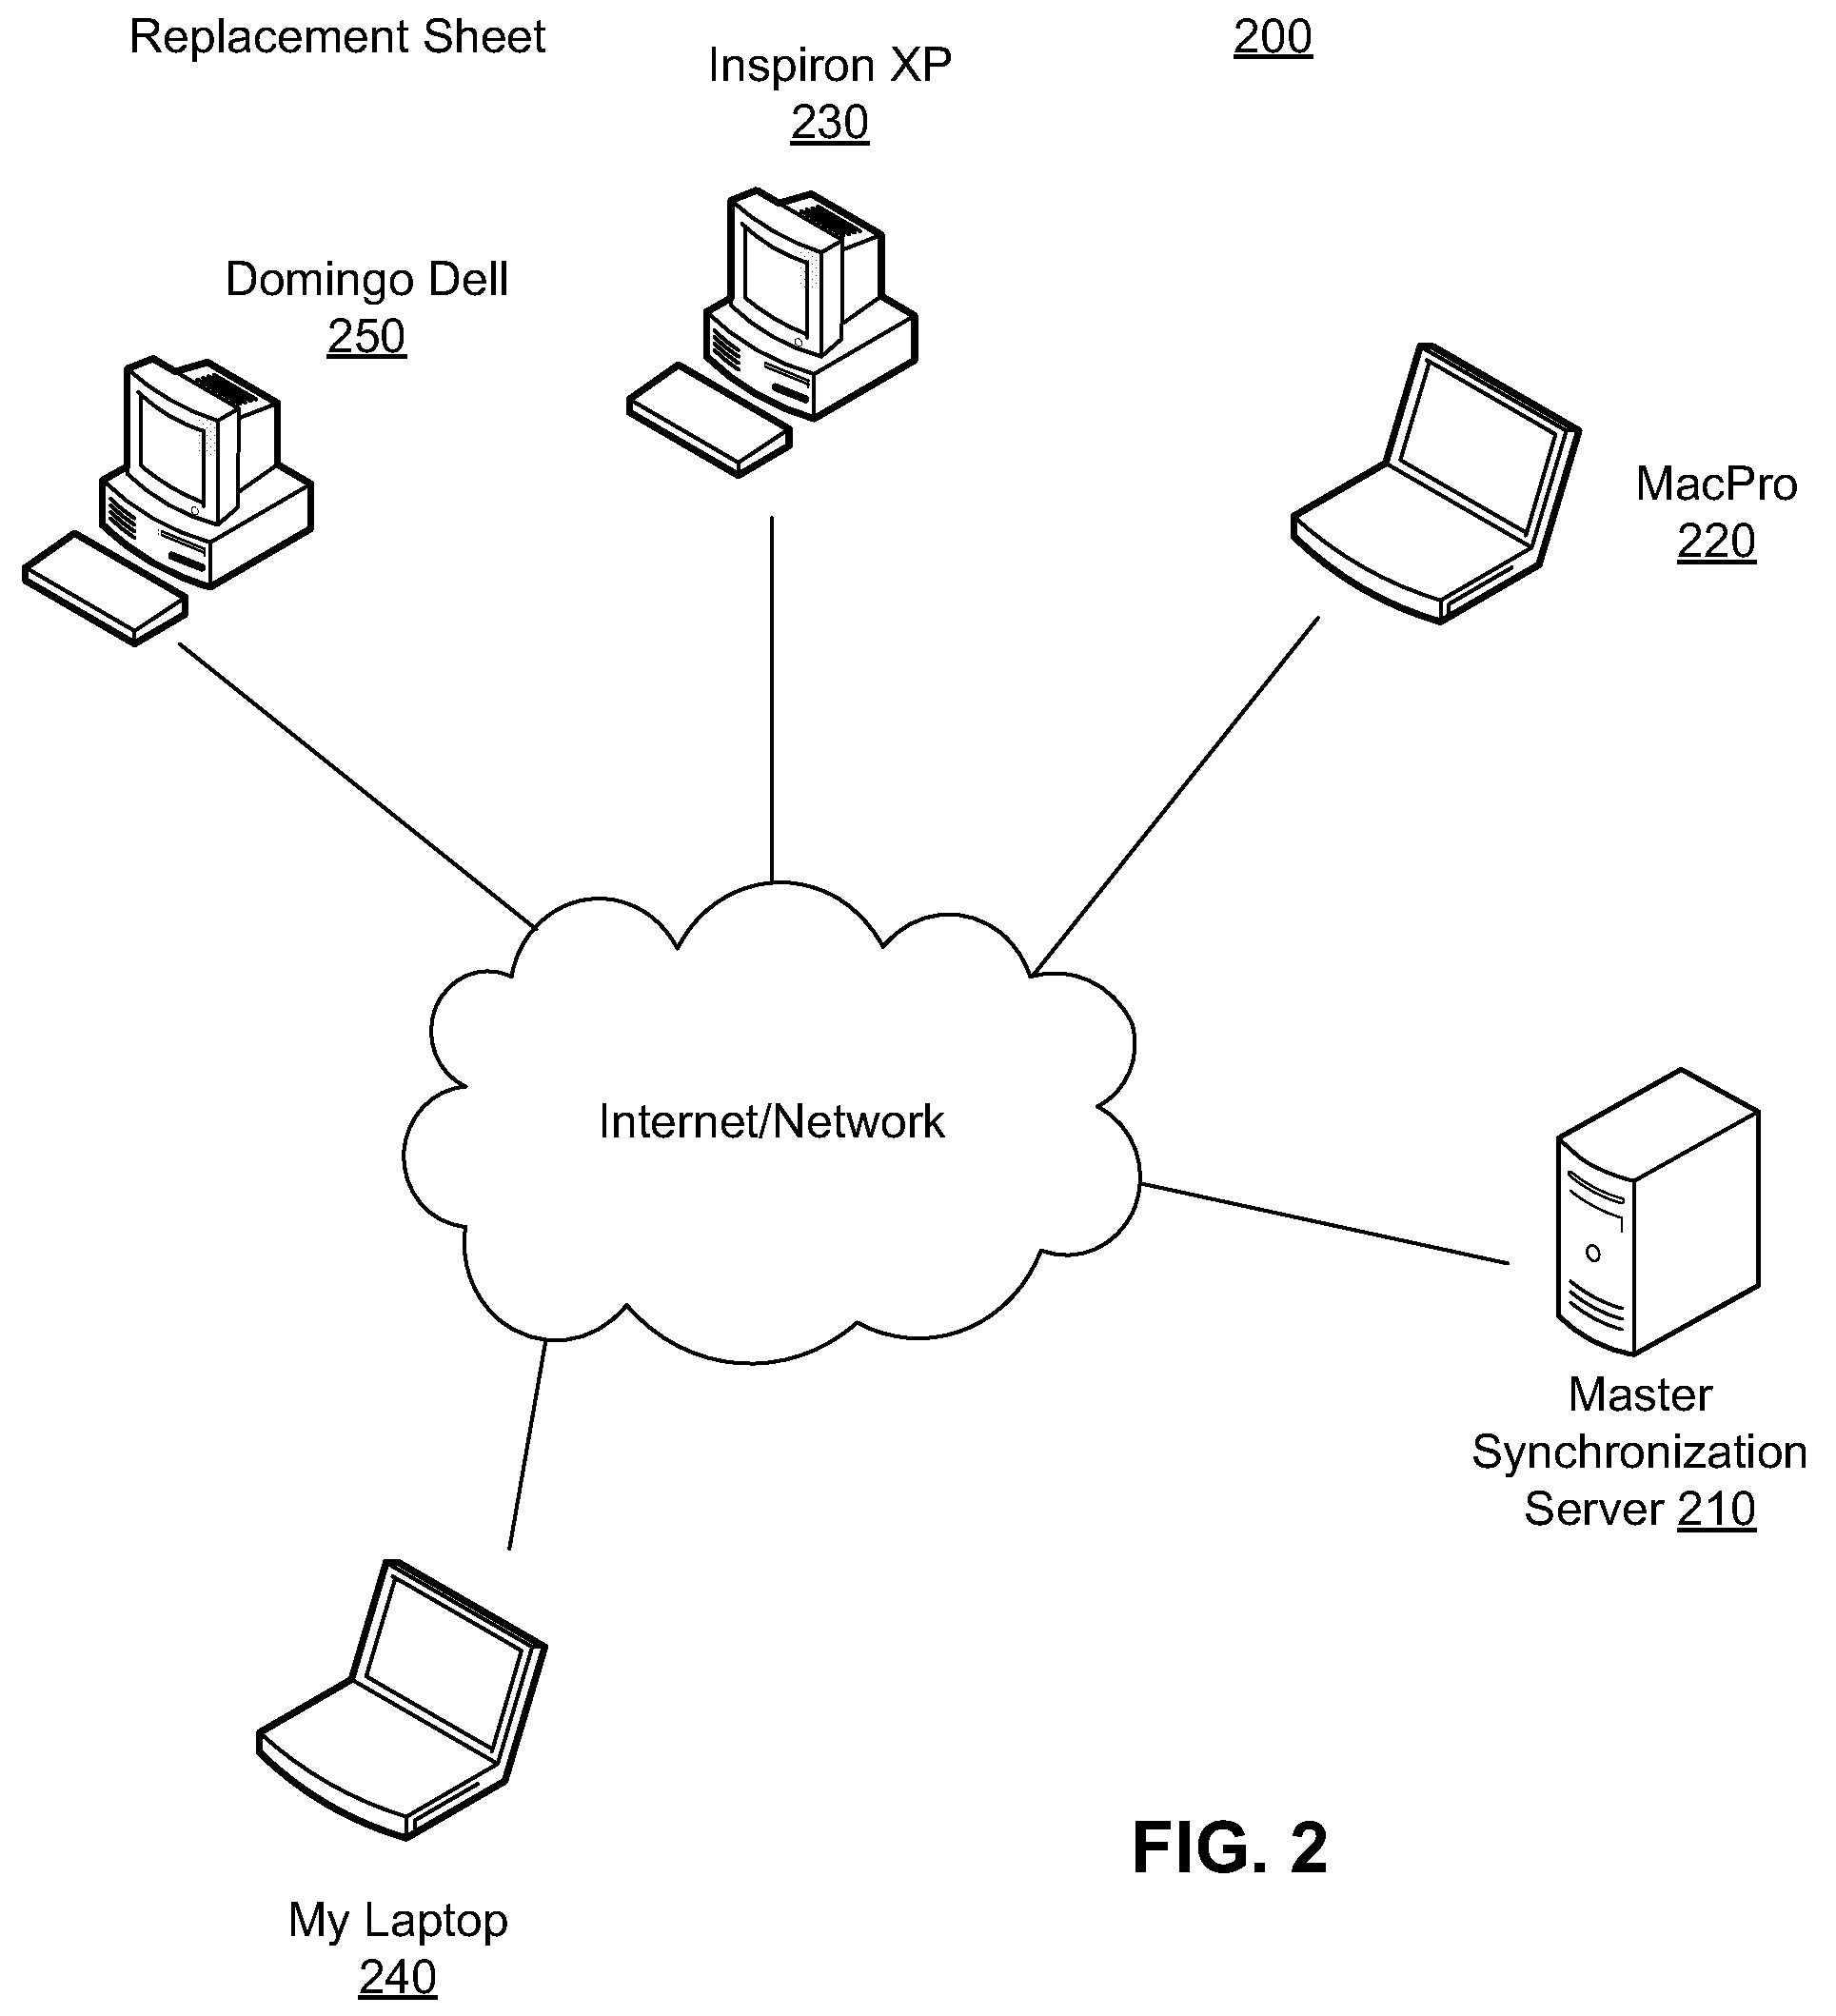 User interface for managing and viewing synchronization settings in a synchronization system